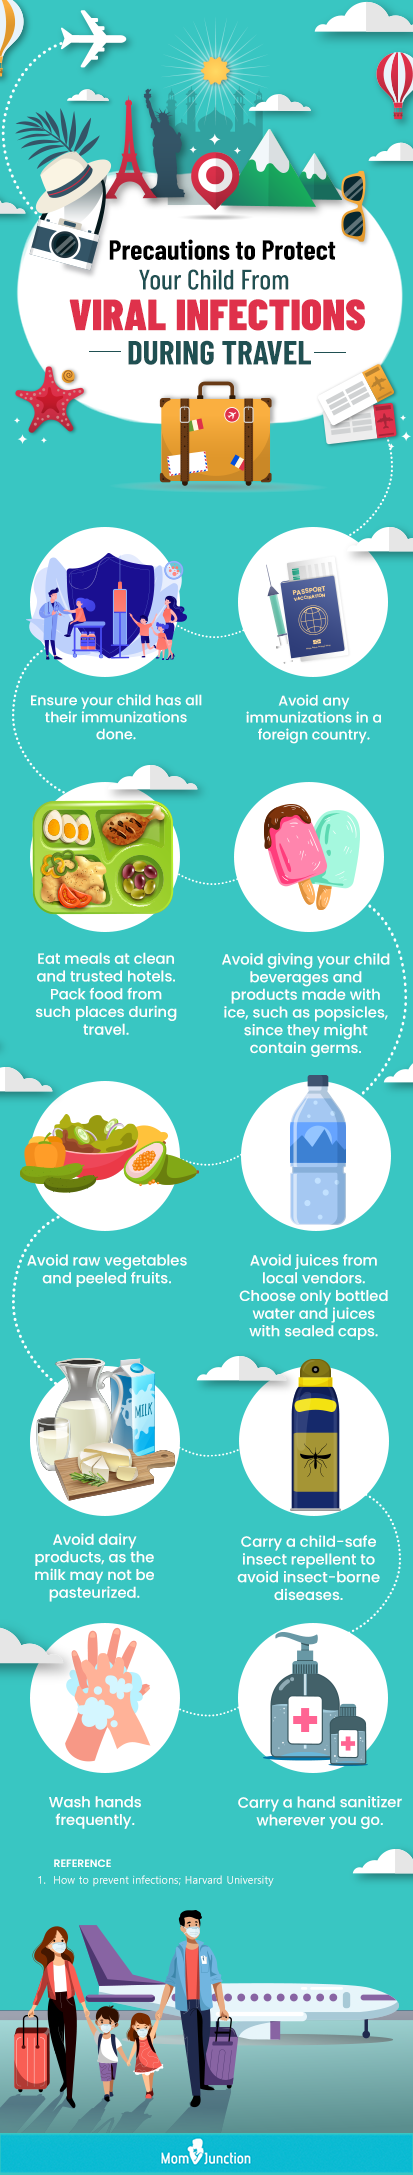 precautions to protect your child from viral infections during travel (infographic)